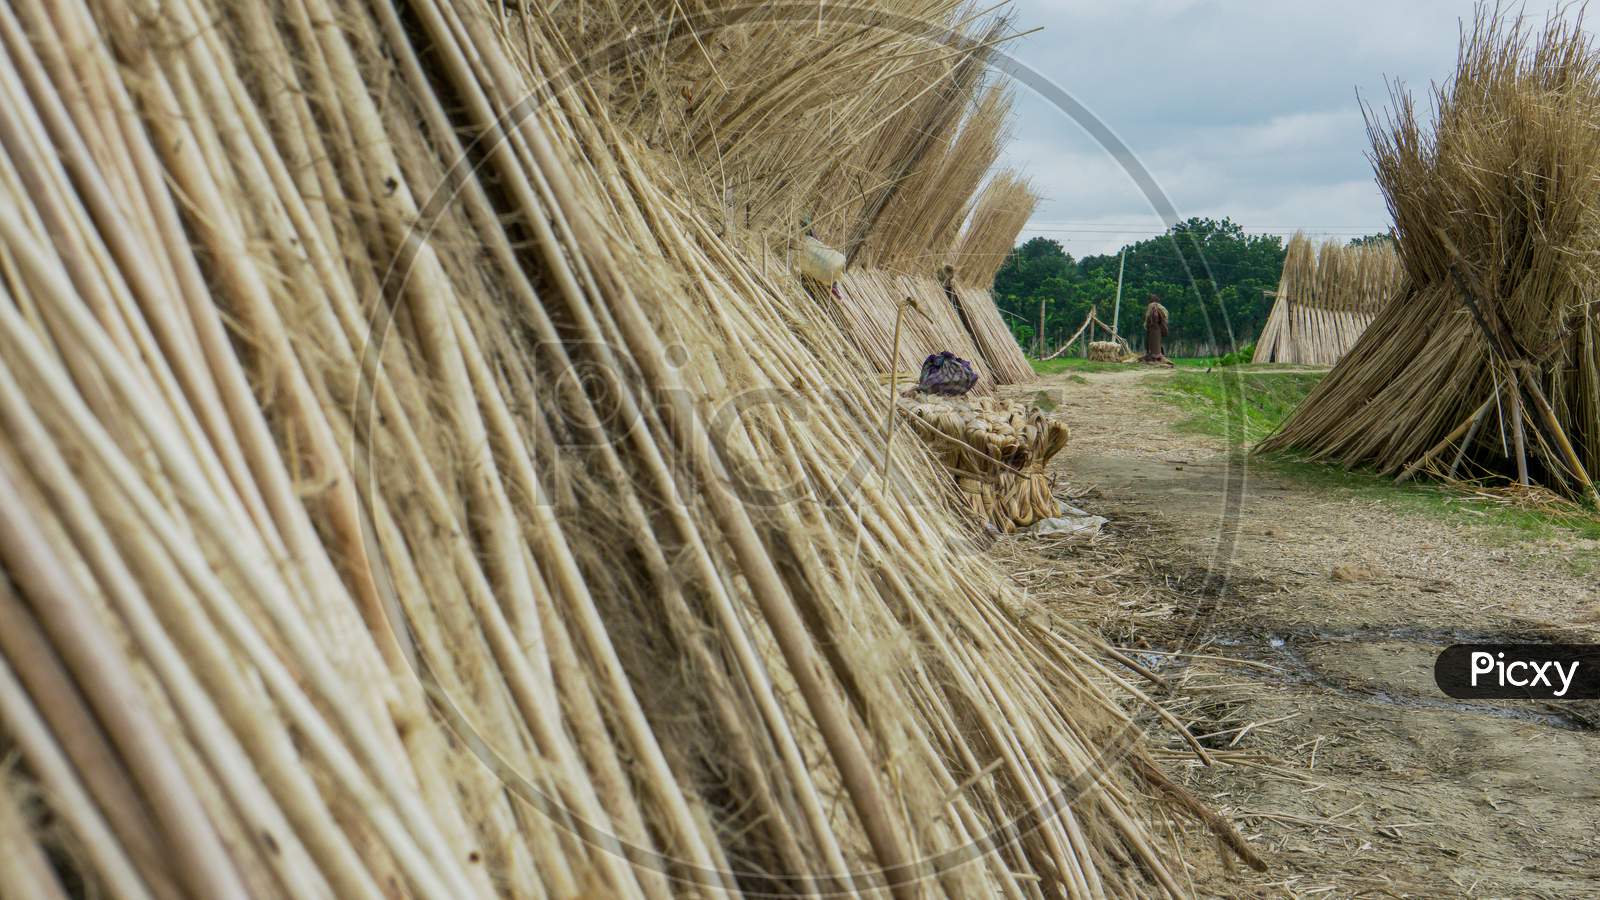 Jute Is Extracted From The Bark Of The White Jute Plant (Corchorus Capsularis) And To A Lesser Extent From Tossa Jute. Jute Was Once Known As The Golden Fibre Of Bangladesh.